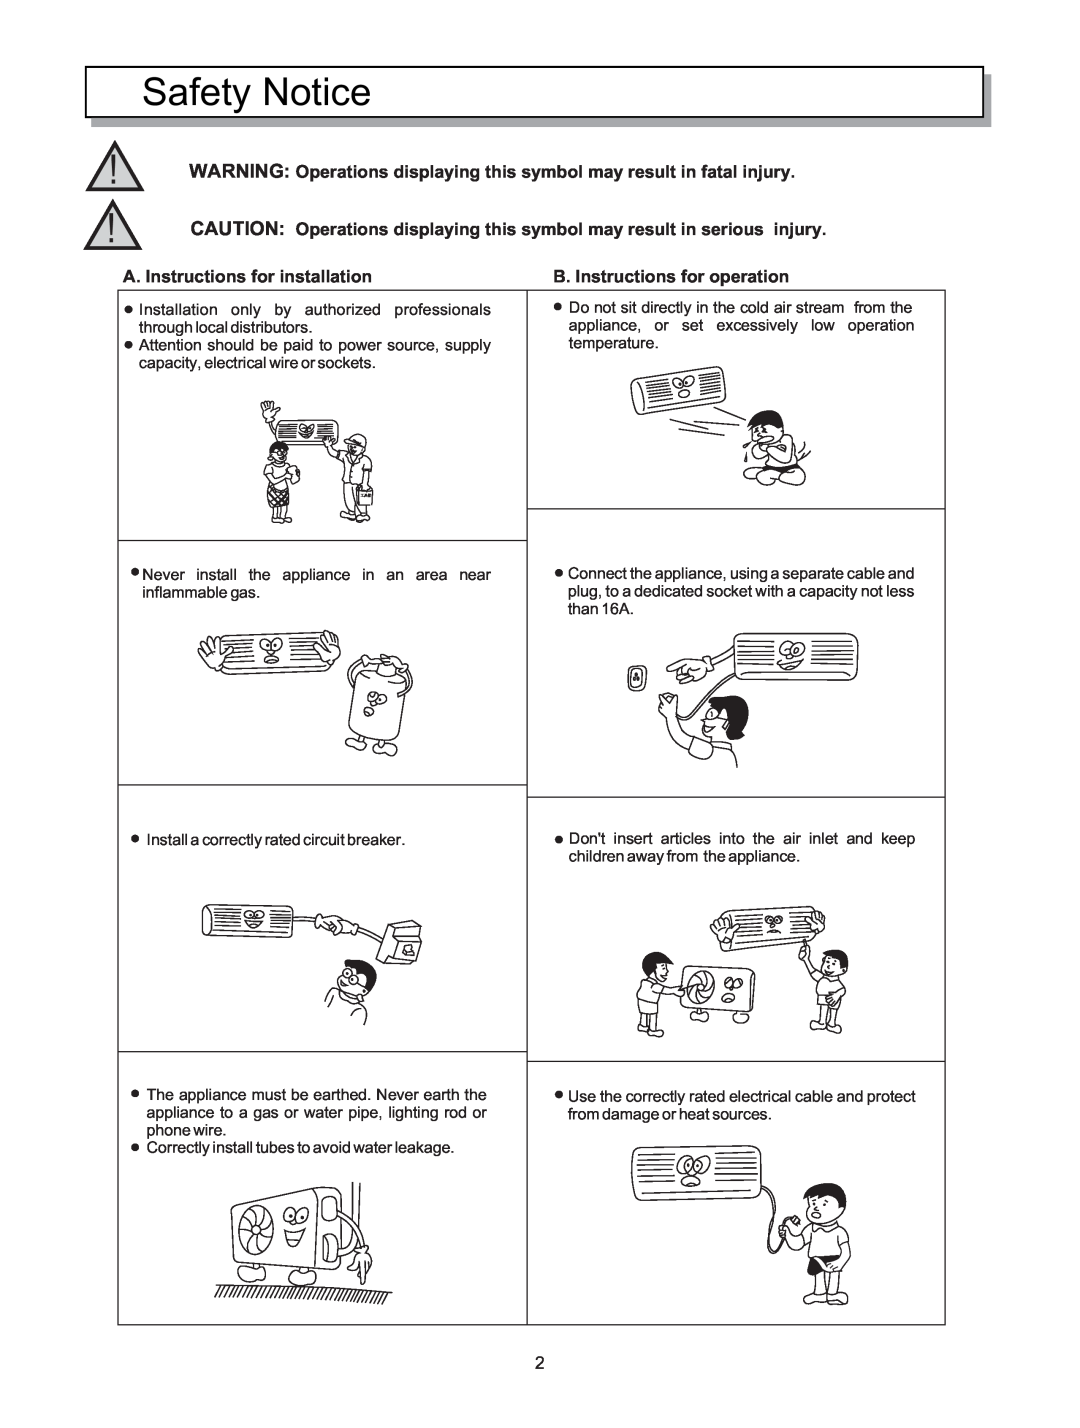 Hisense Group KF-5002GWE manual Safety Notice, A. Instructions for installation, B. Instructions for operation 